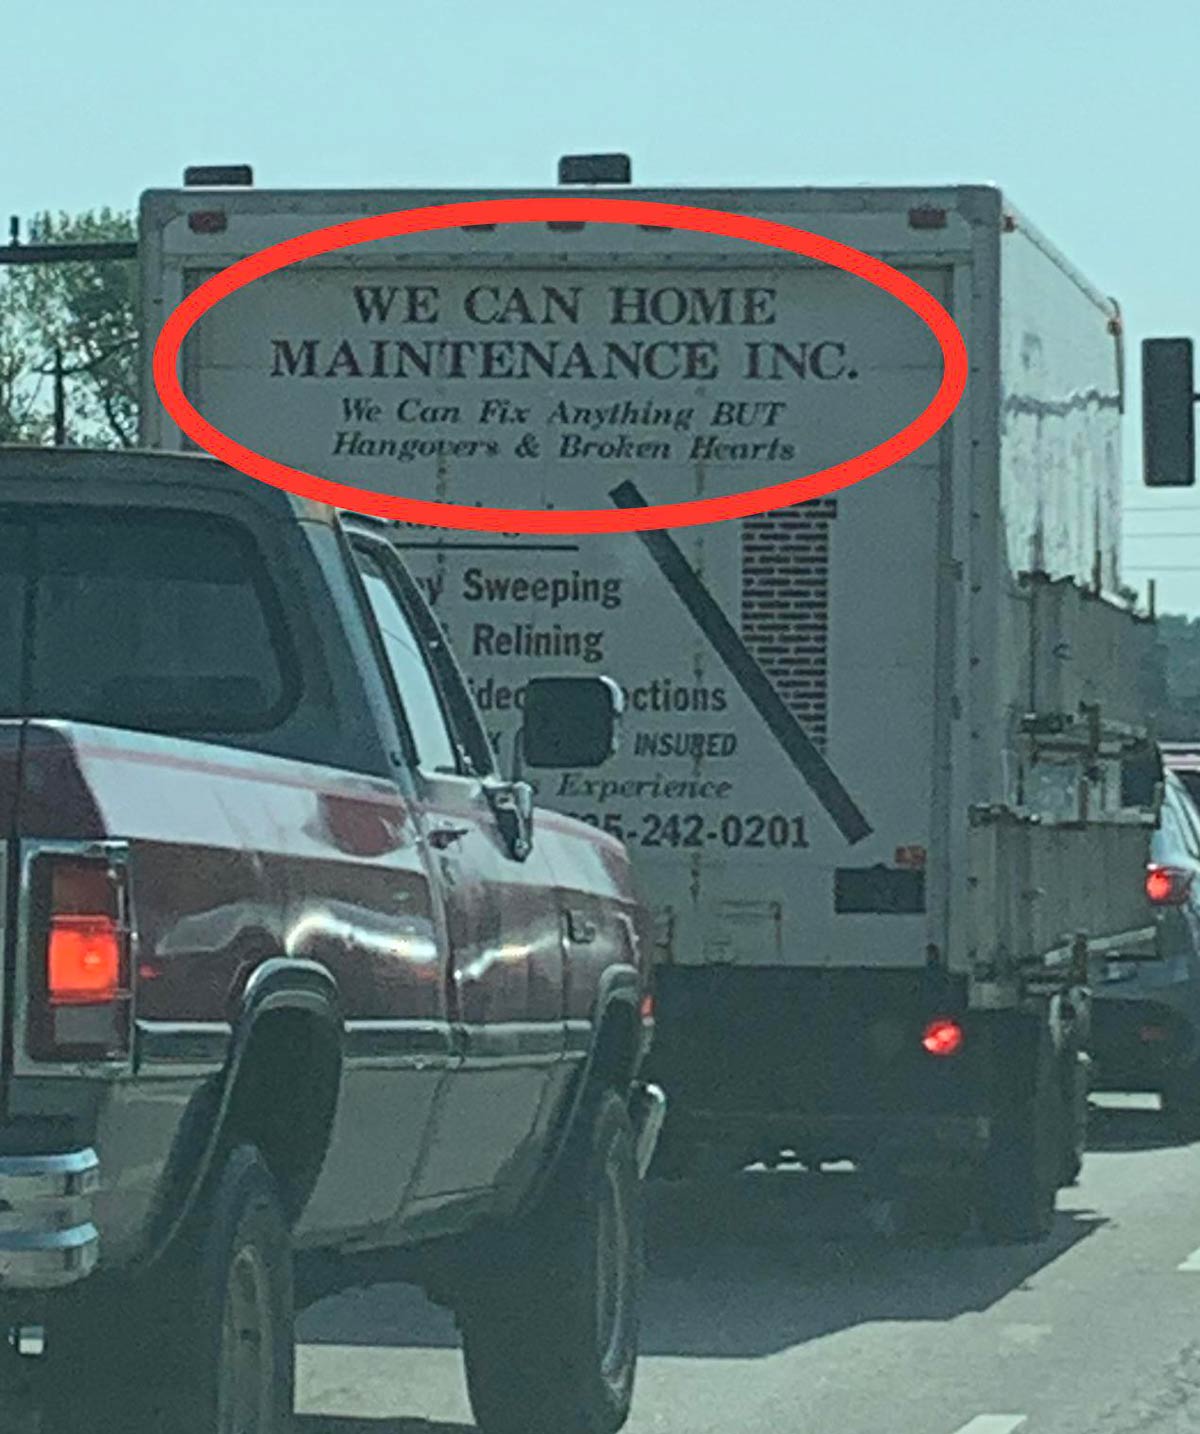 We can fix anything but...